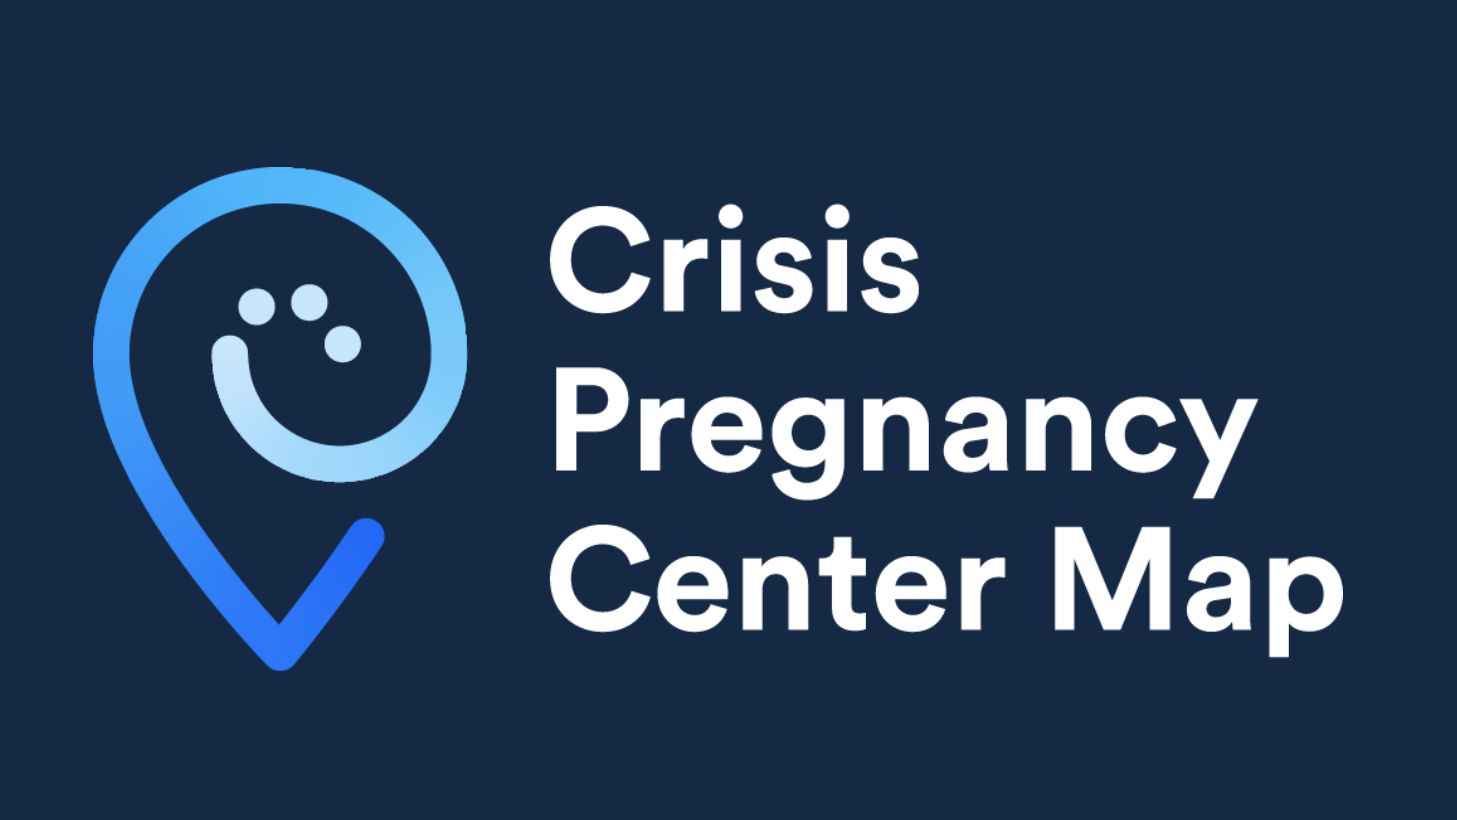 New data reveals CPCs are spreading, casting wider net to attract non-pregnant clients